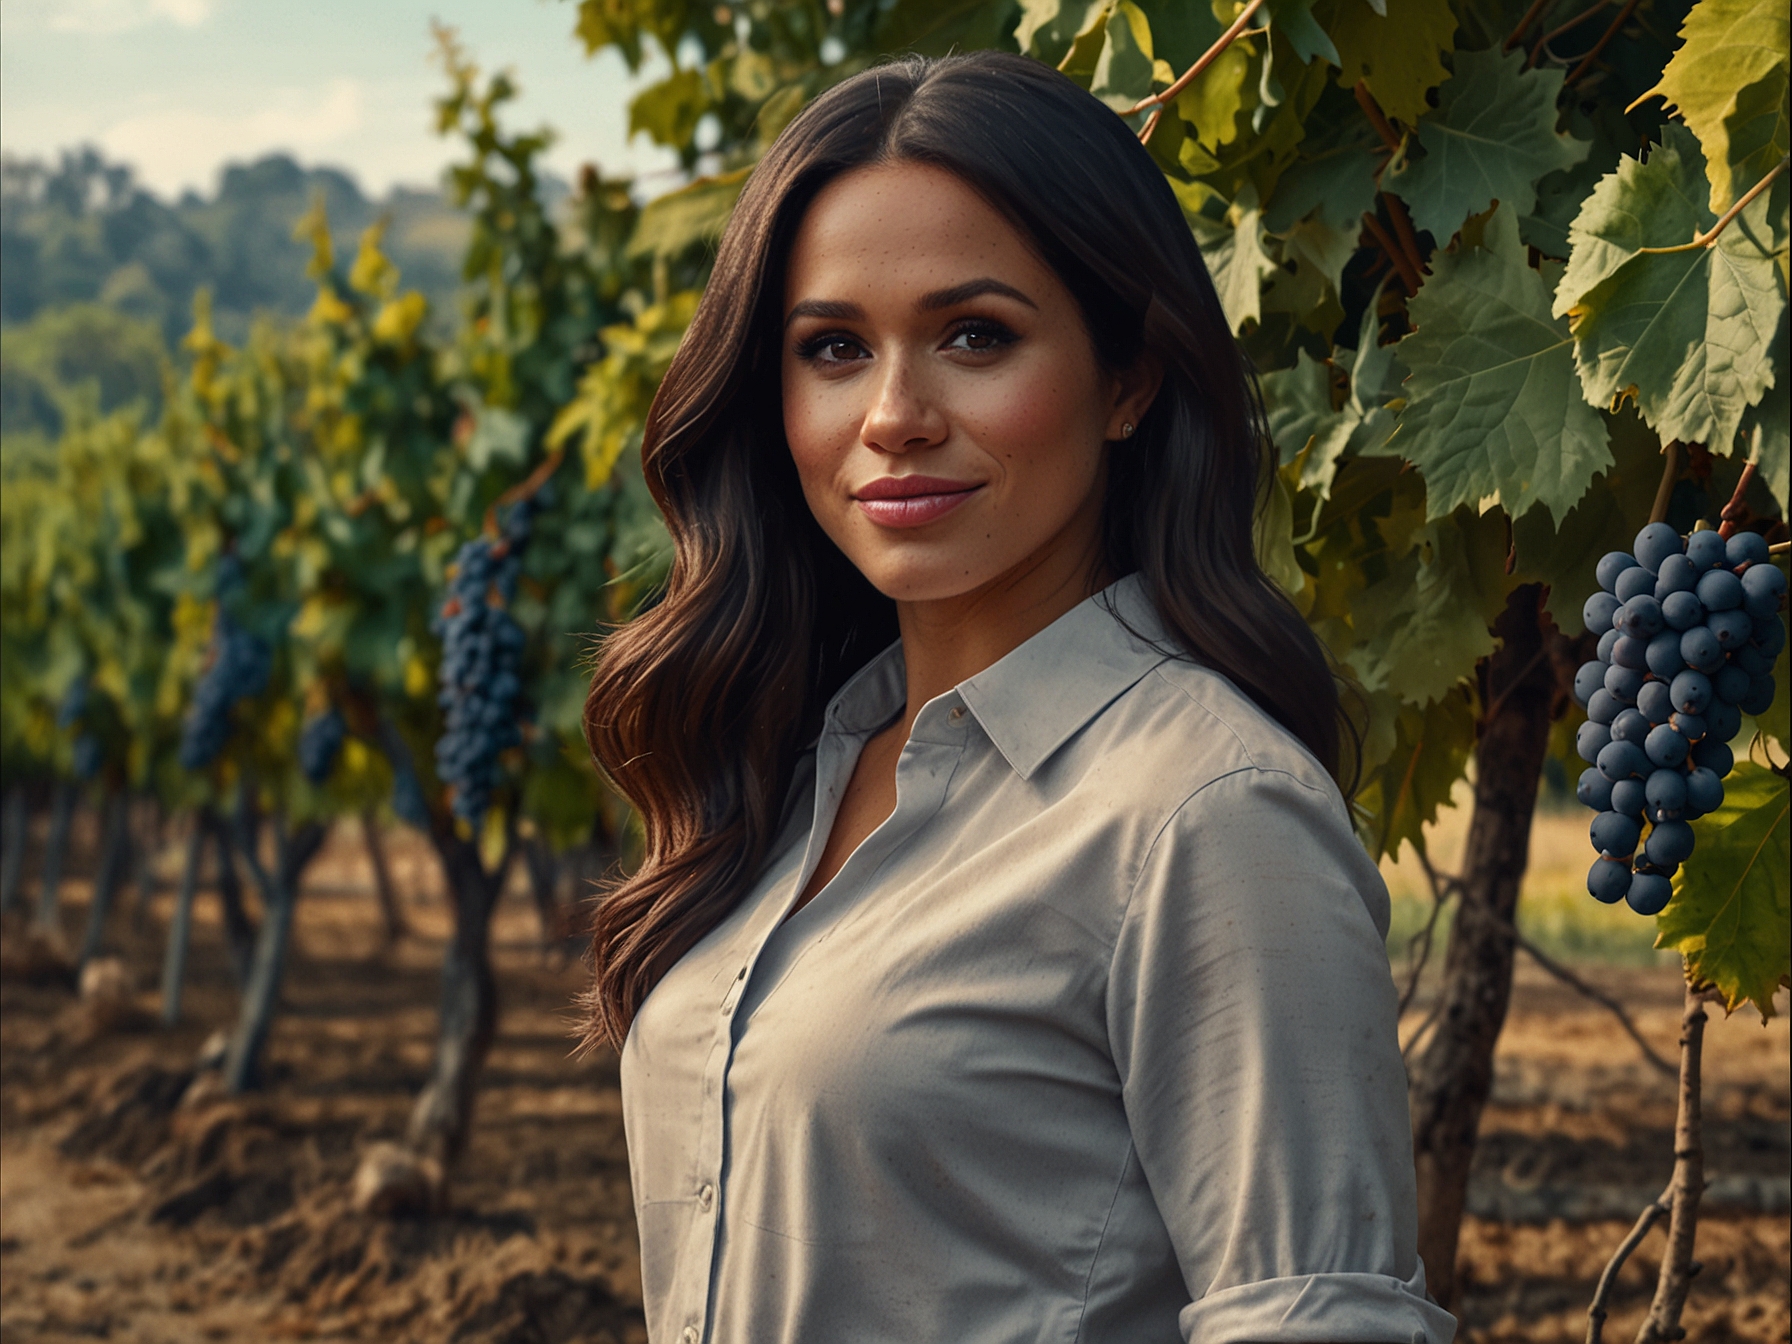 Meghan Markle at a vineyard, surrounded by lush grapevines, symbolizing her new venture in wine-making and showcasing her commitment to sustainable agriculture.